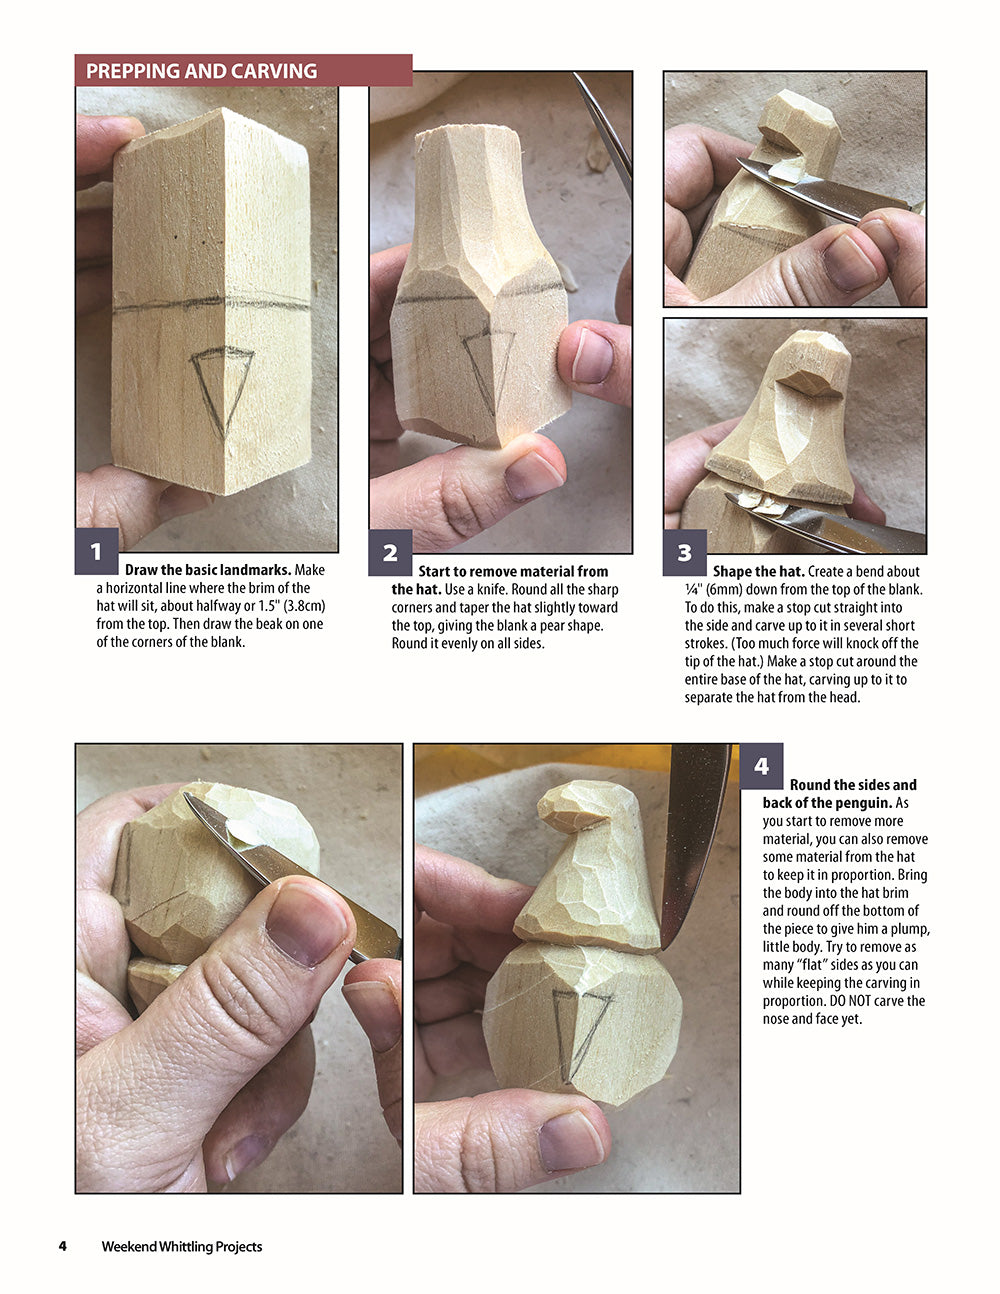 Weekend Whittling Projects